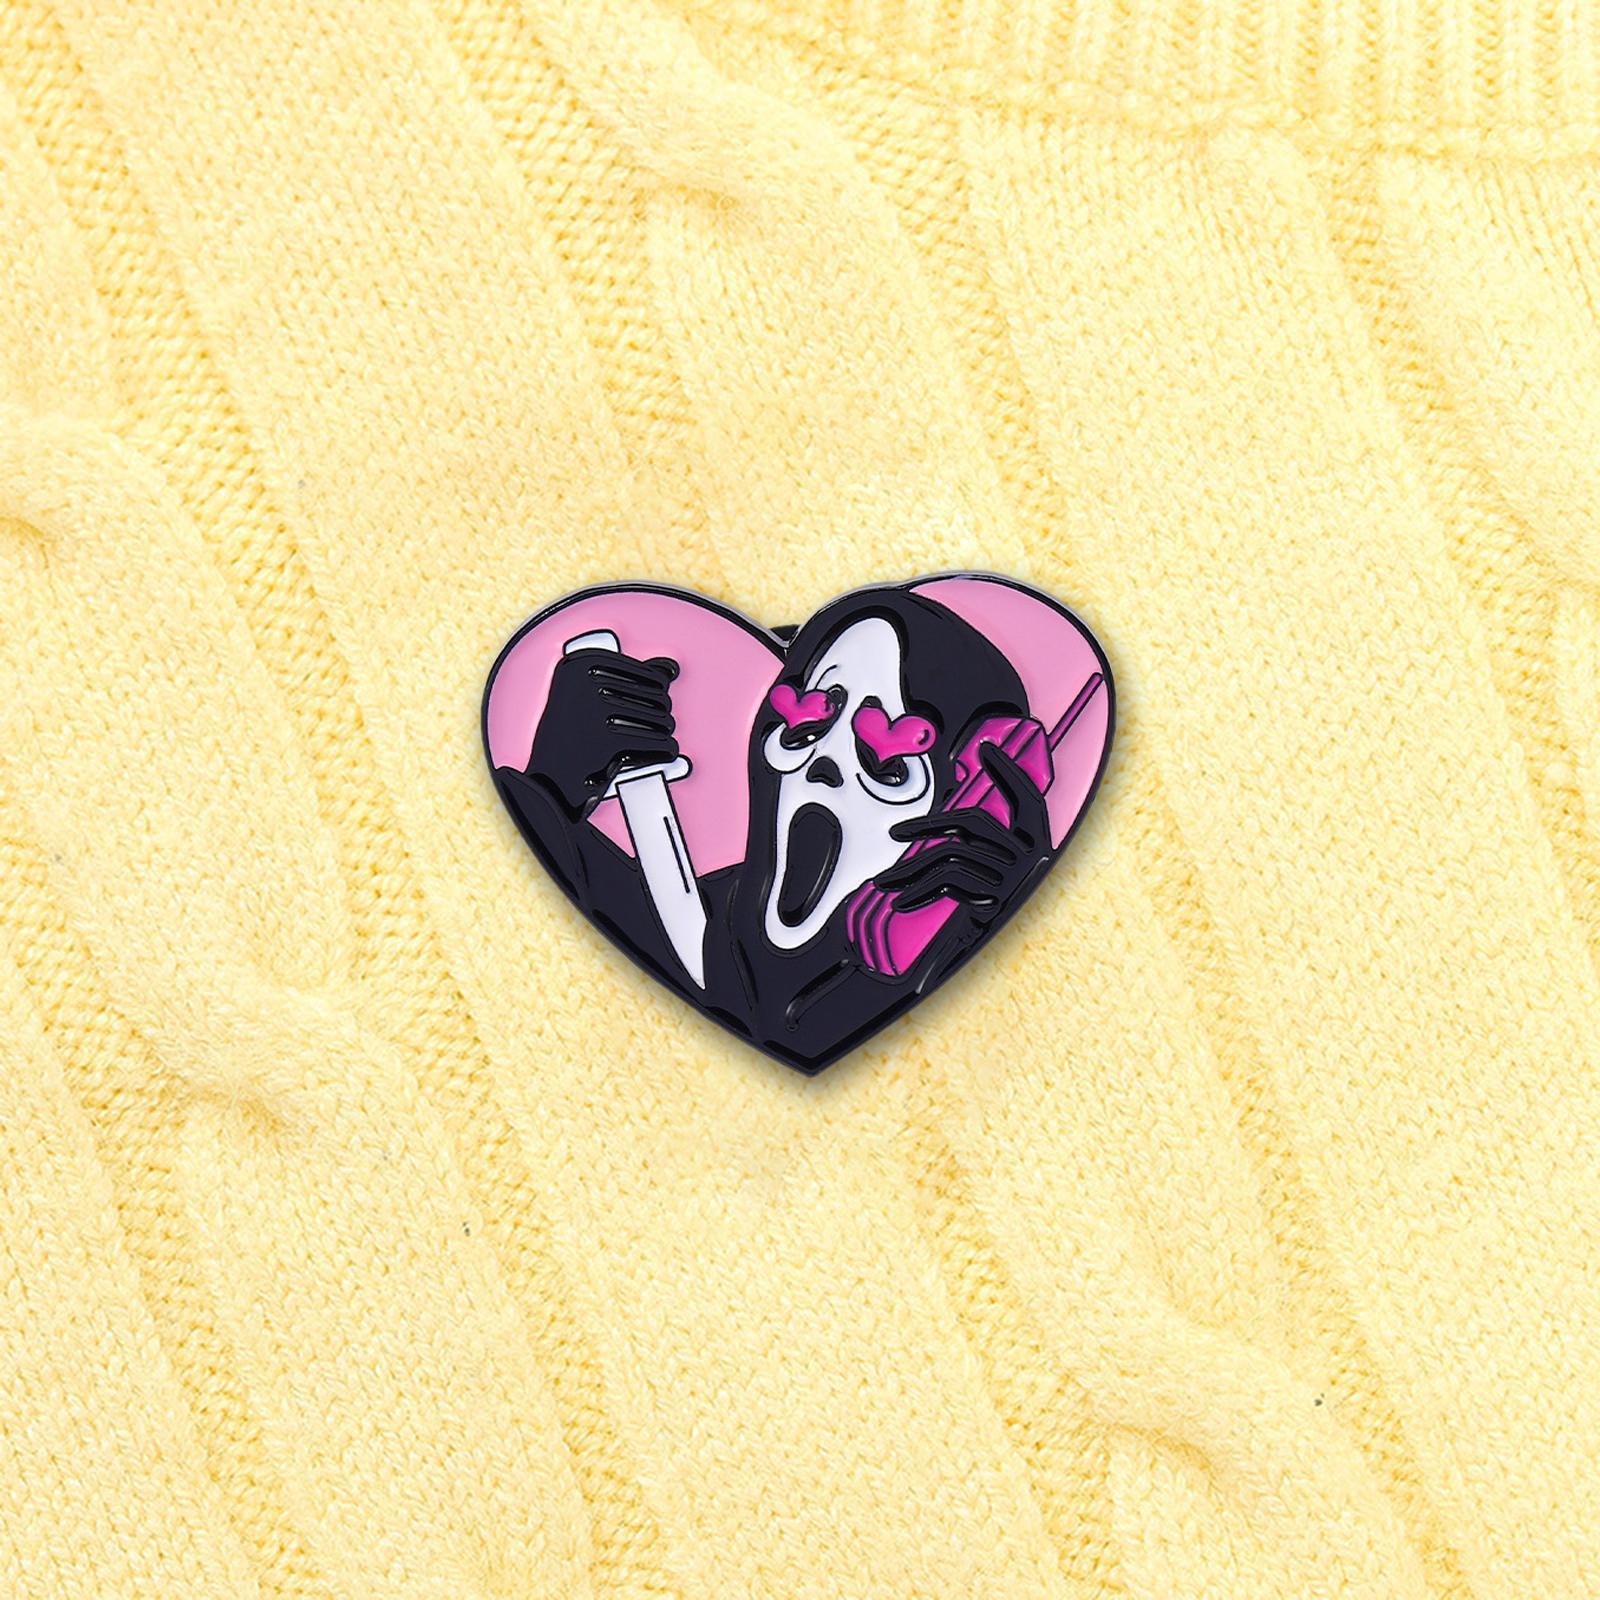 Halloween Pins Metal Brooches Cute Cartoon Lapel Pin for Clothes Hat Jackets